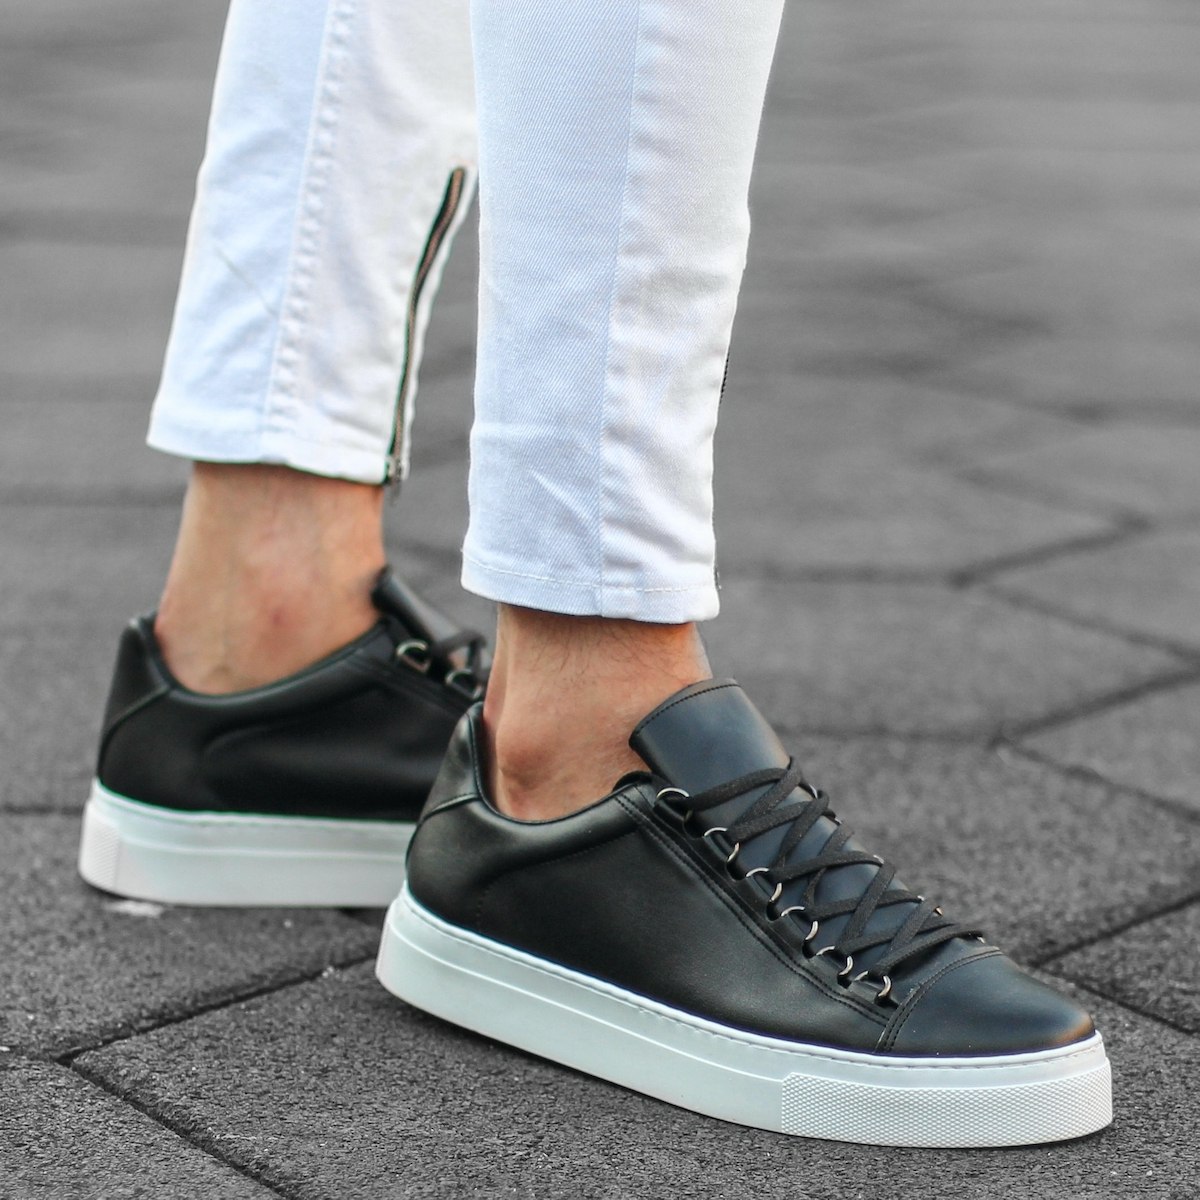 Men’s Low Top Outdoor Sneakers Shoes Black-White